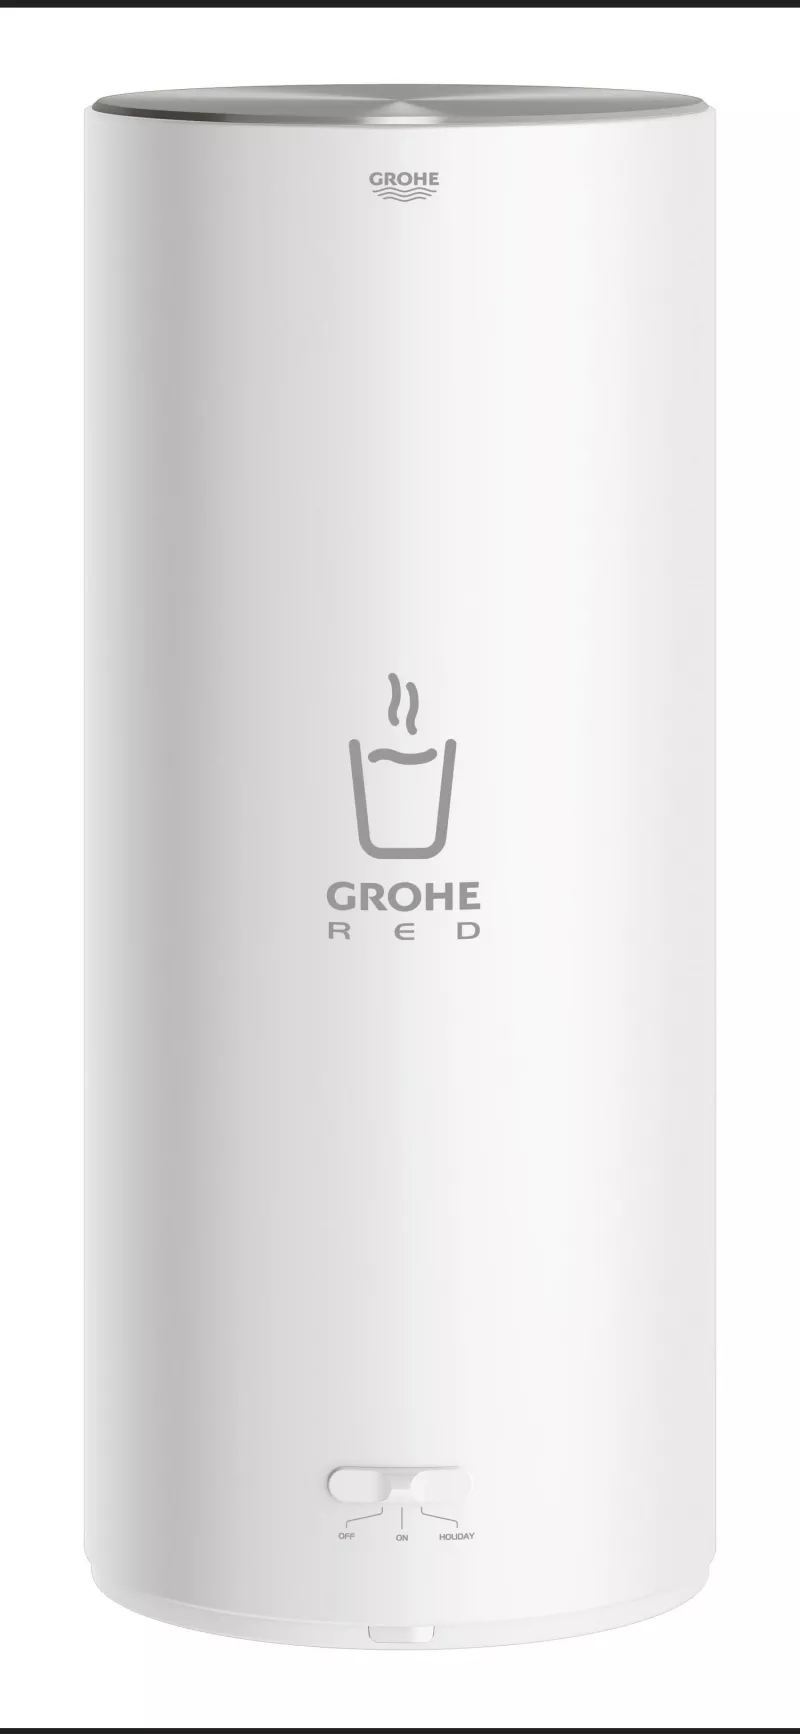 Boiler Grohe Red, M, 7 litri, 40831001